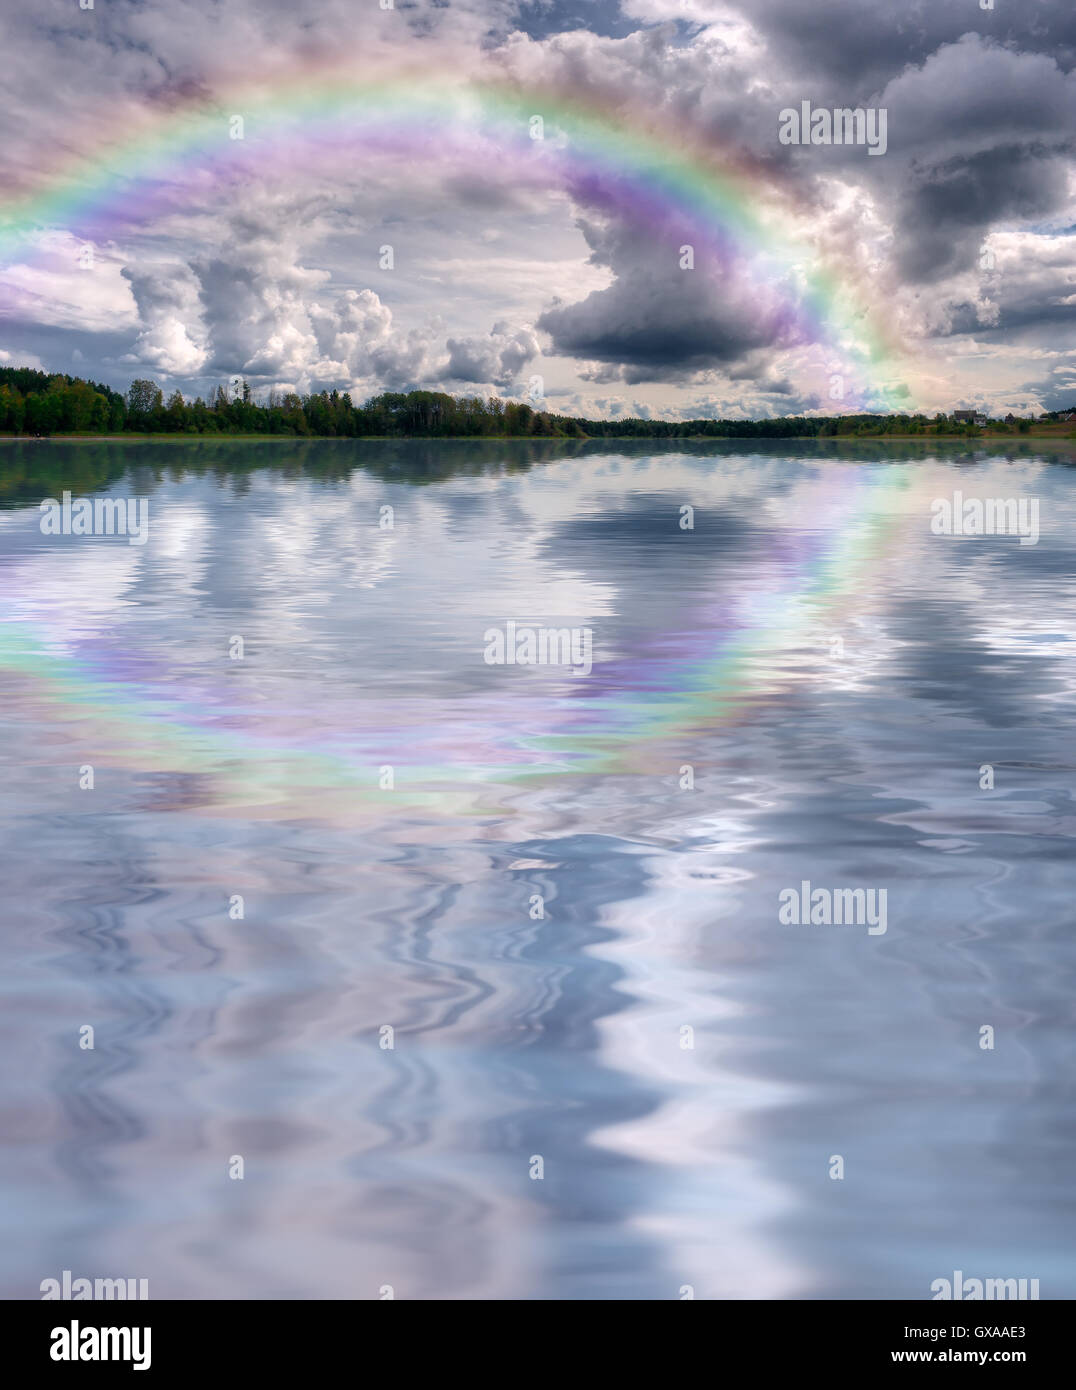 Summer nature landscape: shore with forest (trees) and sky with cumulus clouds and rainbow reflected in the lake (river) water Stock Photo